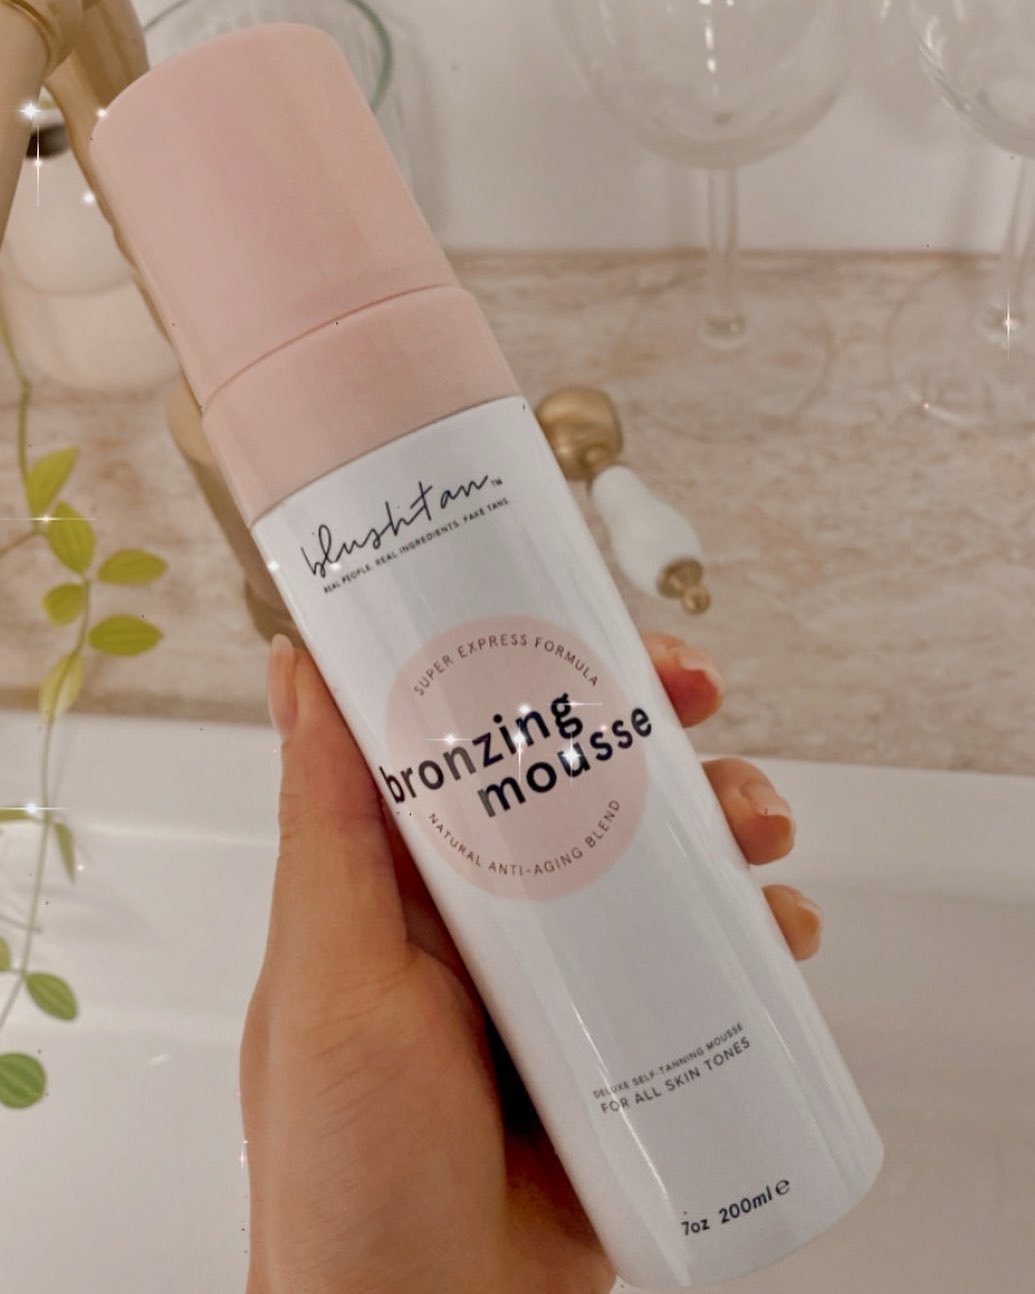 our best seller for a reason ✨ bronzing mousse is formulated with hydrating + anti-aging ingredients that keeps your skin smooth &amp; dewy while providing a healthy, natural looking glow for every skin tone 😍 ​​​​​​​​​
ps - layer it on top of your 